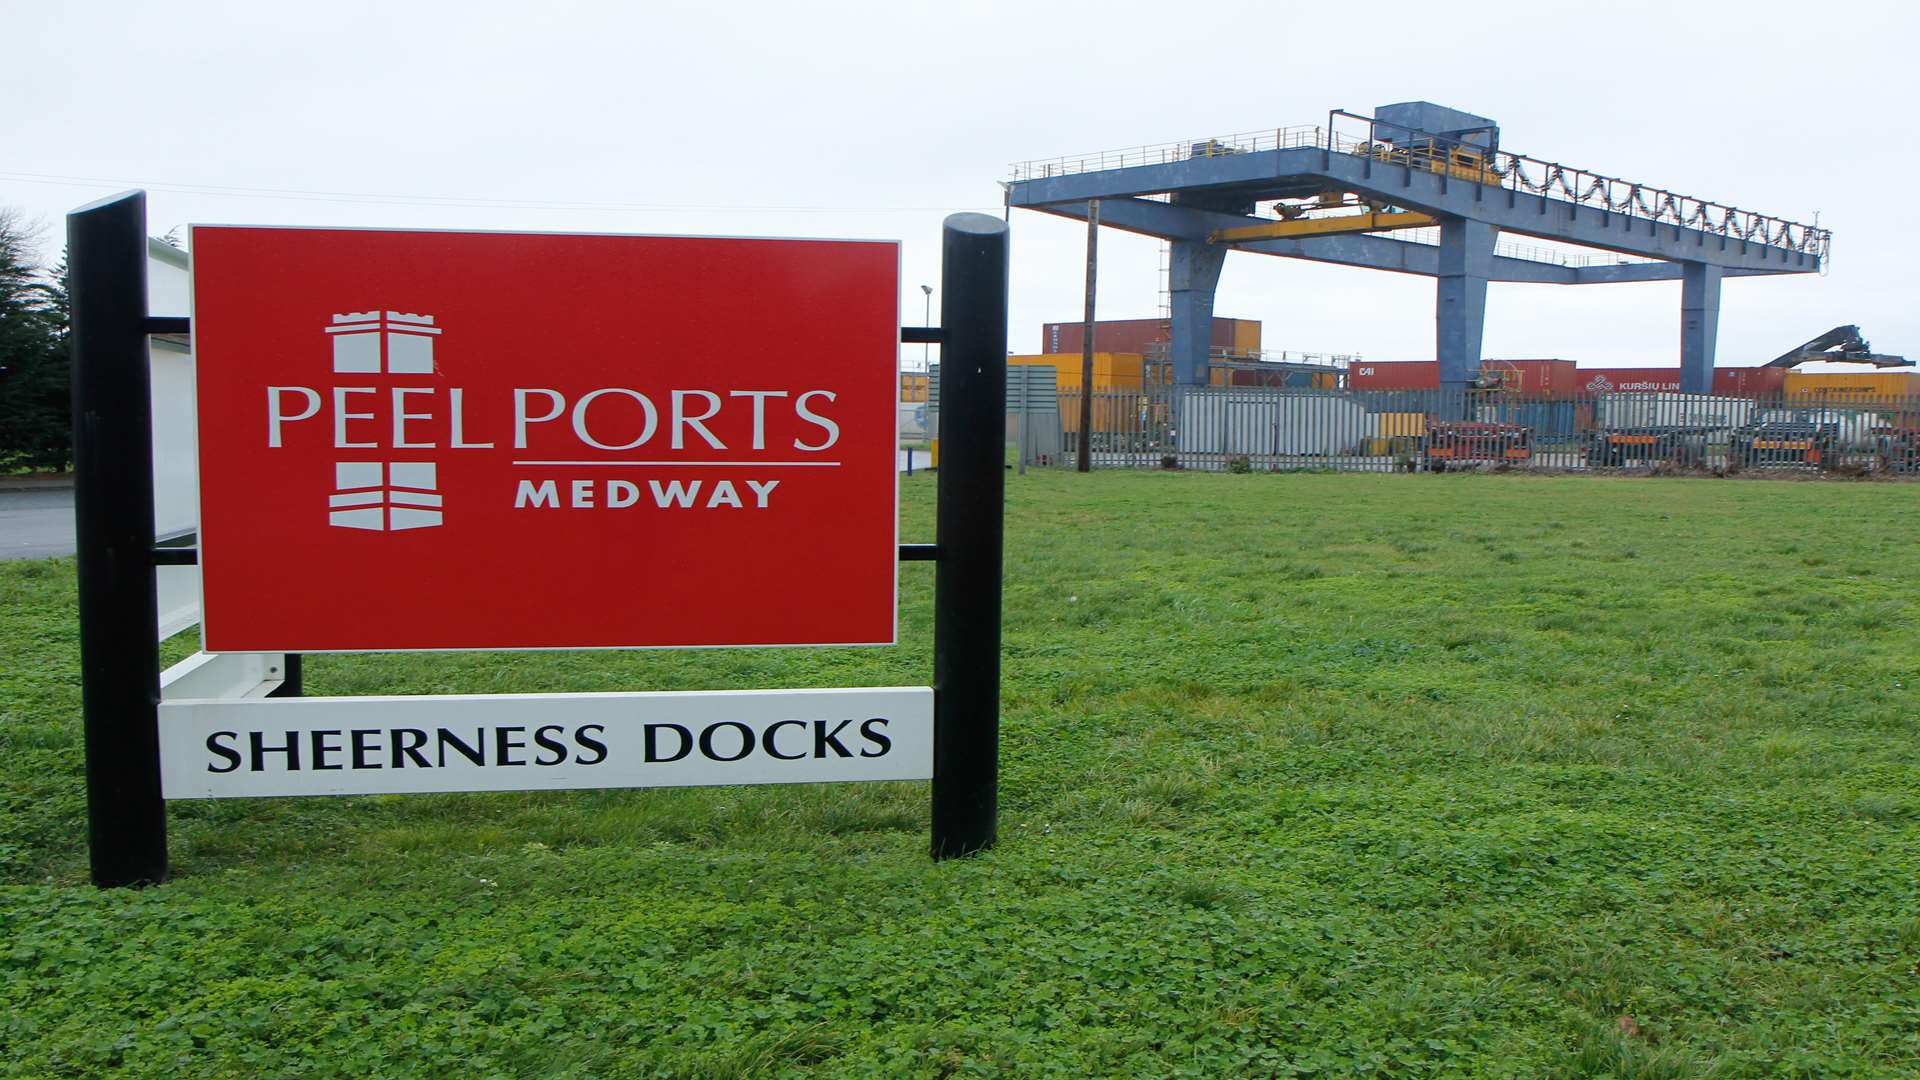 Peel Ports in Sheerness